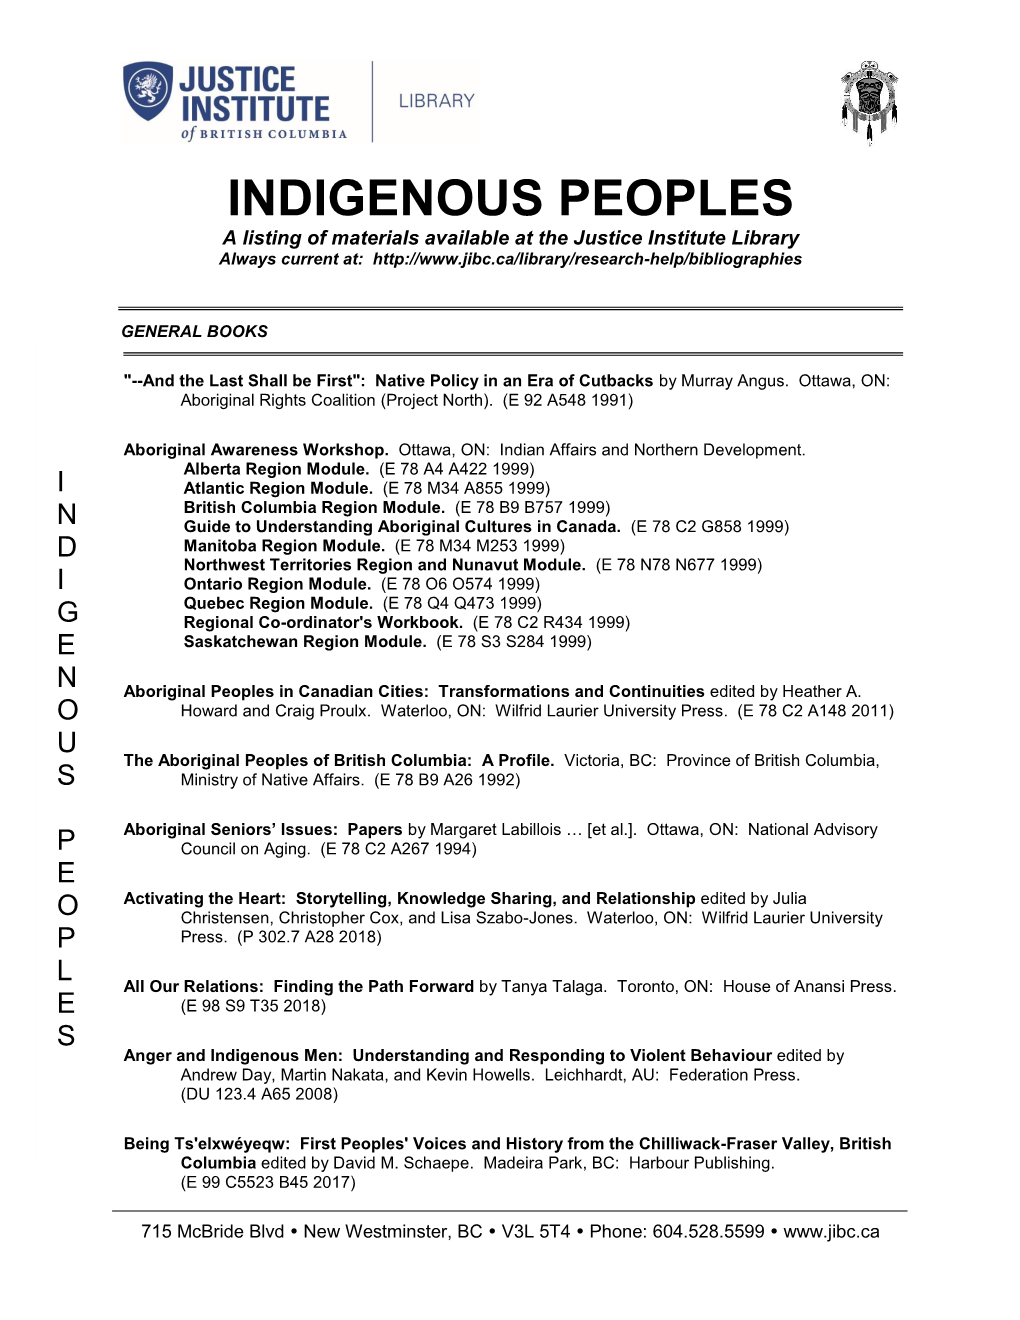 INDIGENOUS PEOPLES a Listing of Materials Available at the Justice Institute Library Always Current At